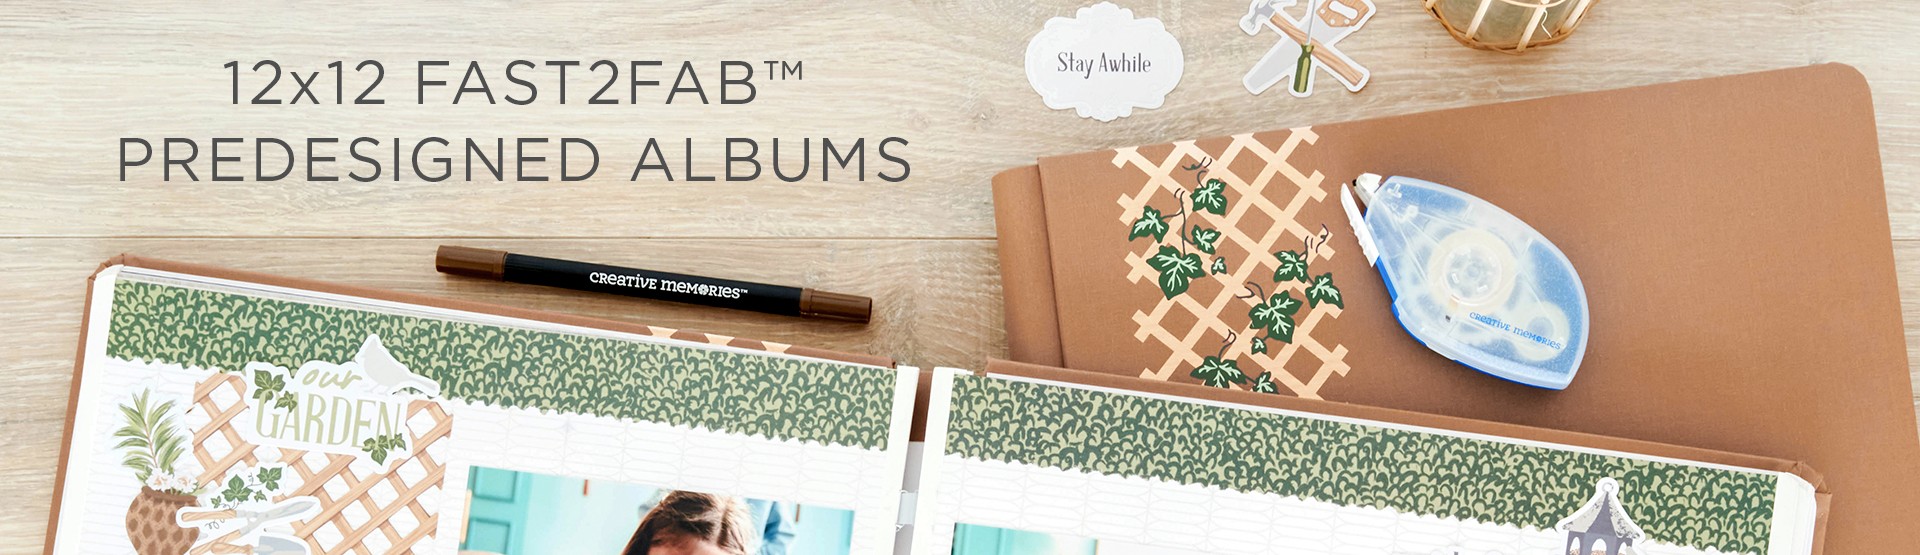 12x12 Fast2Fab Predesigned Albums